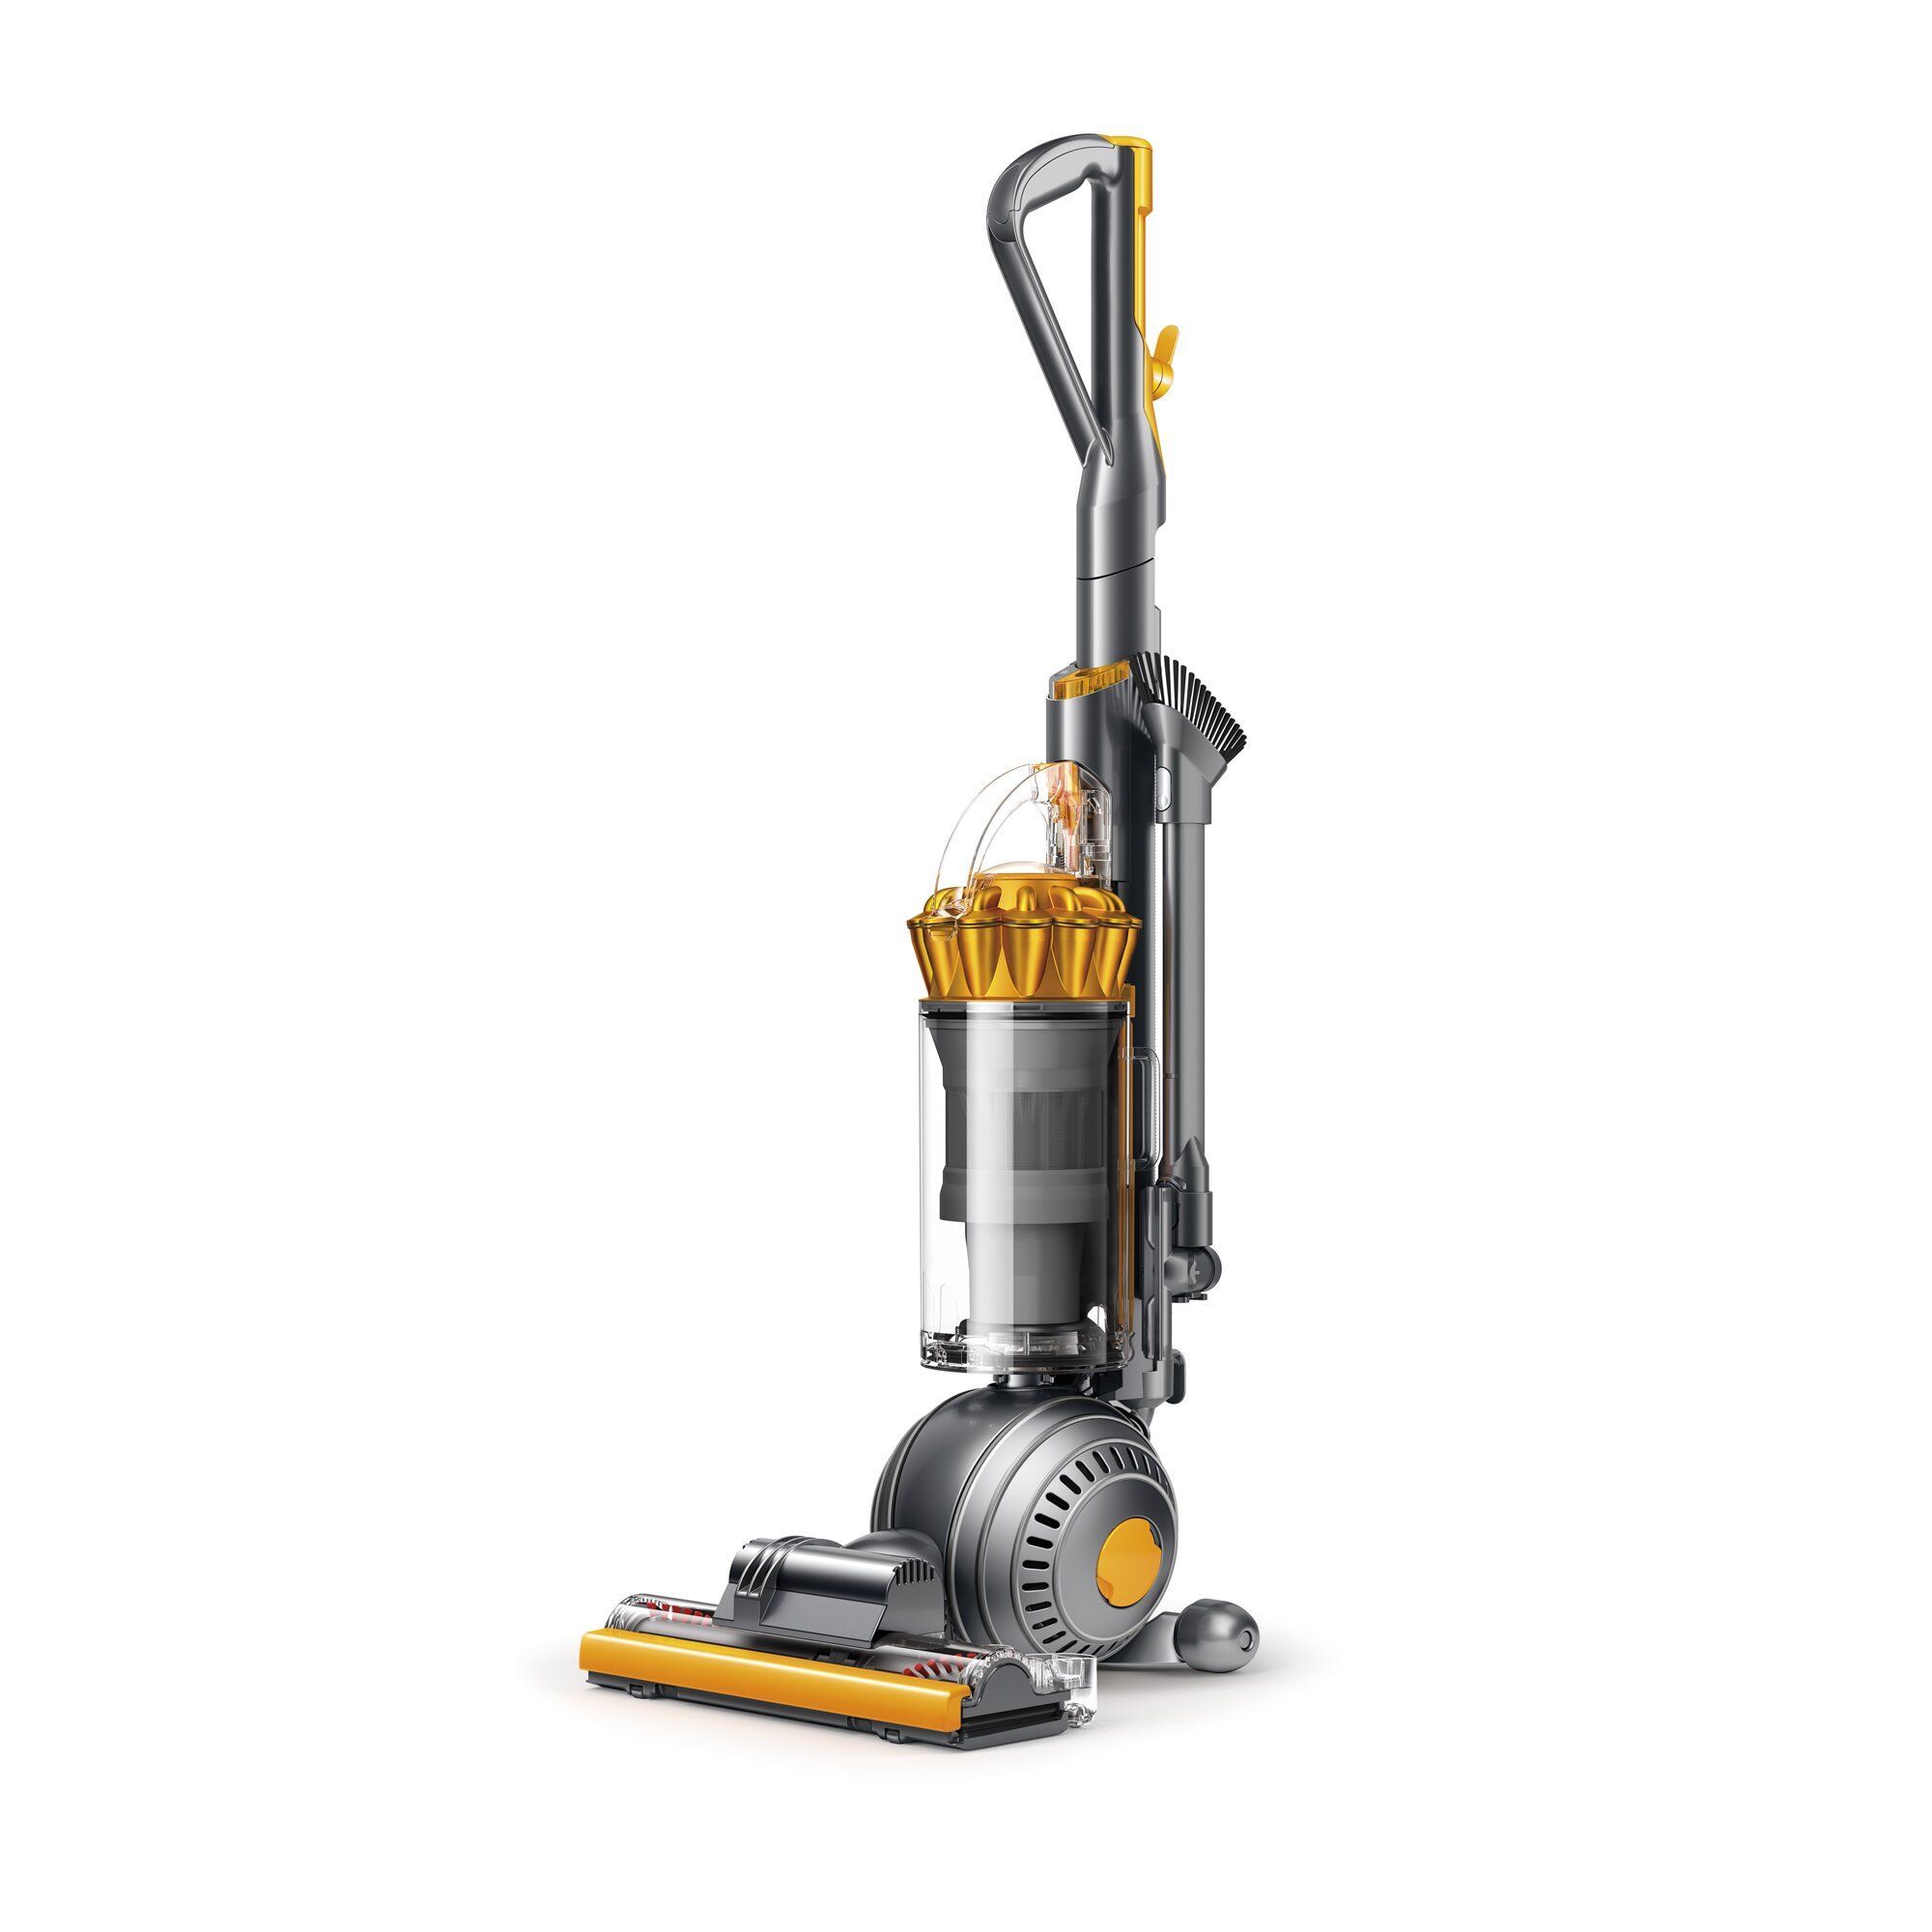 The Best 8 Dyson Vacuums In 2021, Can You Use A Dyson Ball Vacuum On Hardwood Floors